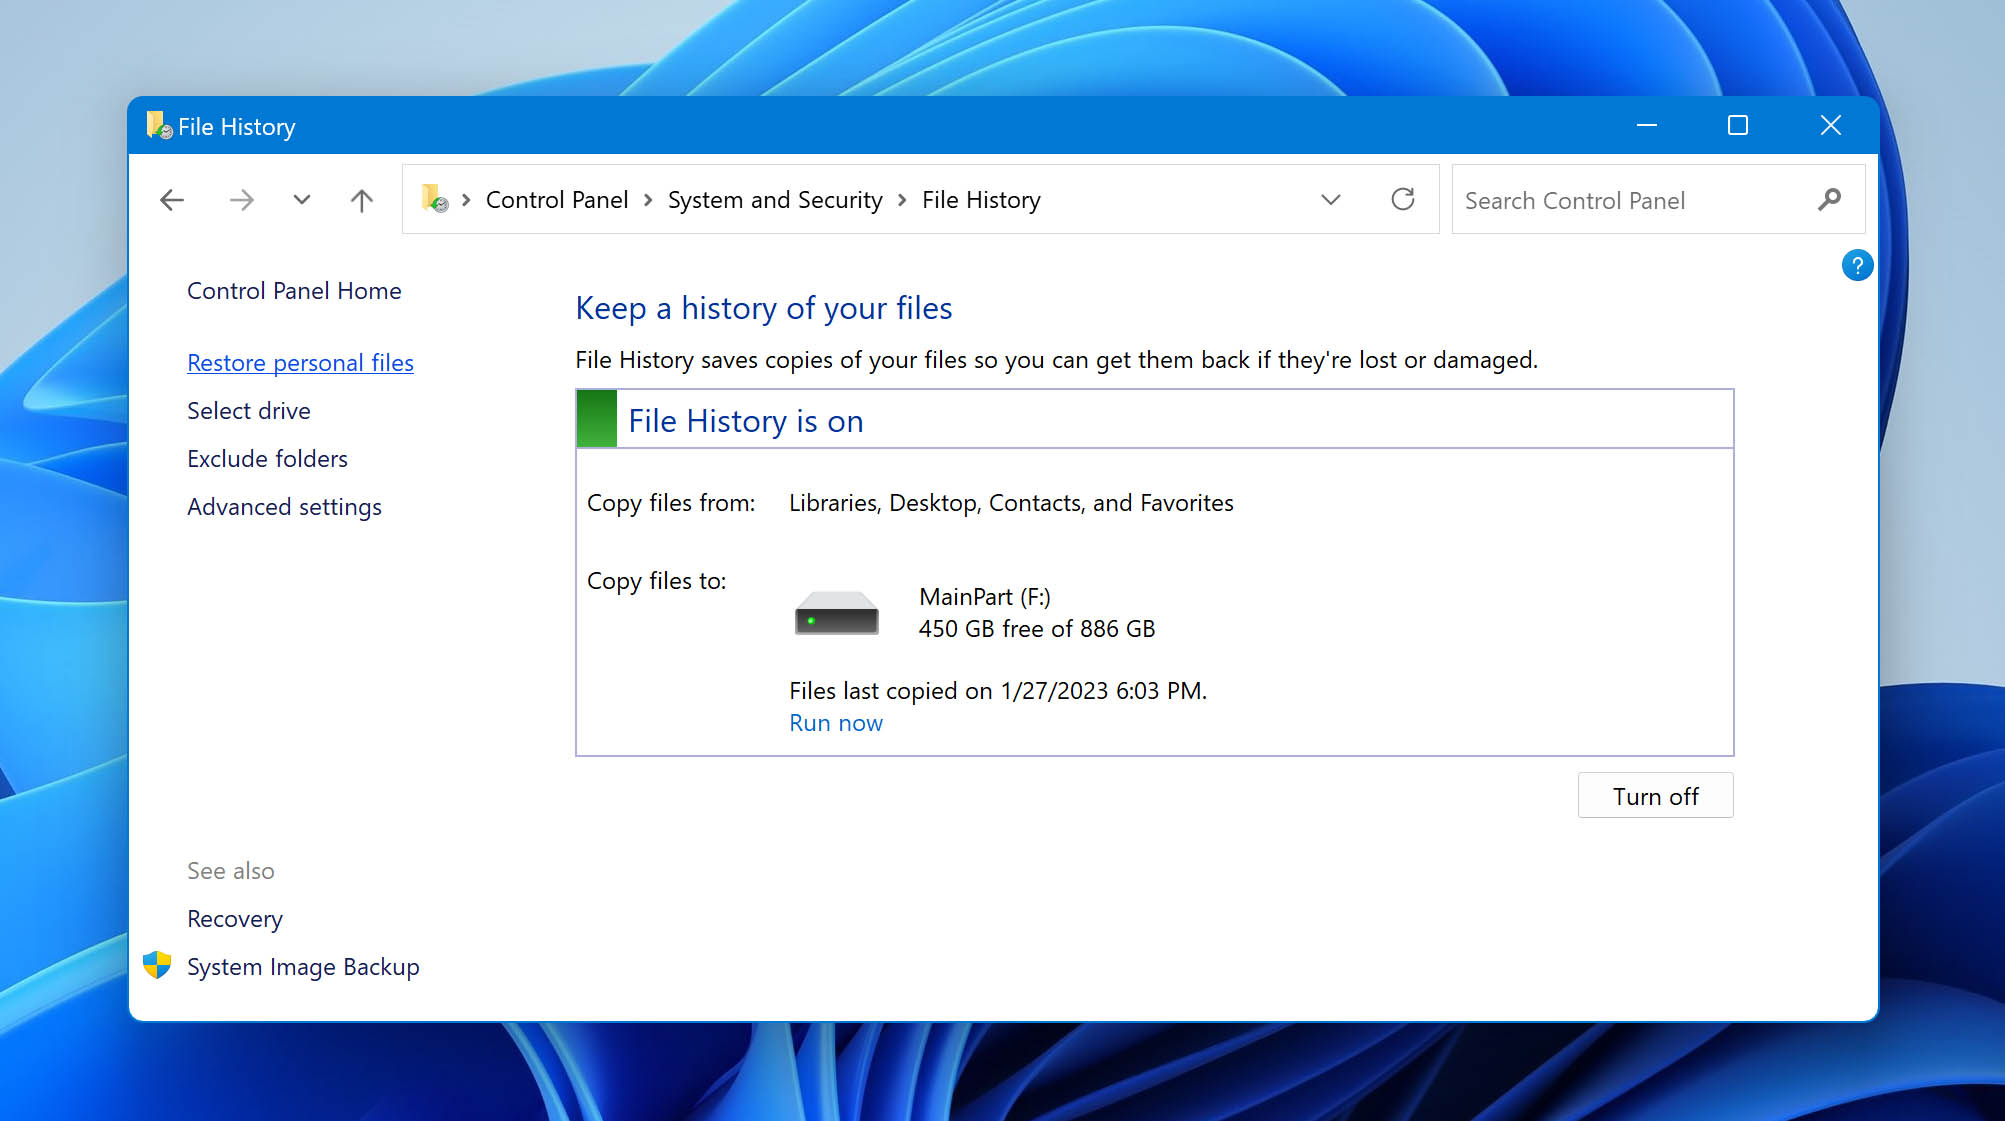 Restore personal files option in File History.